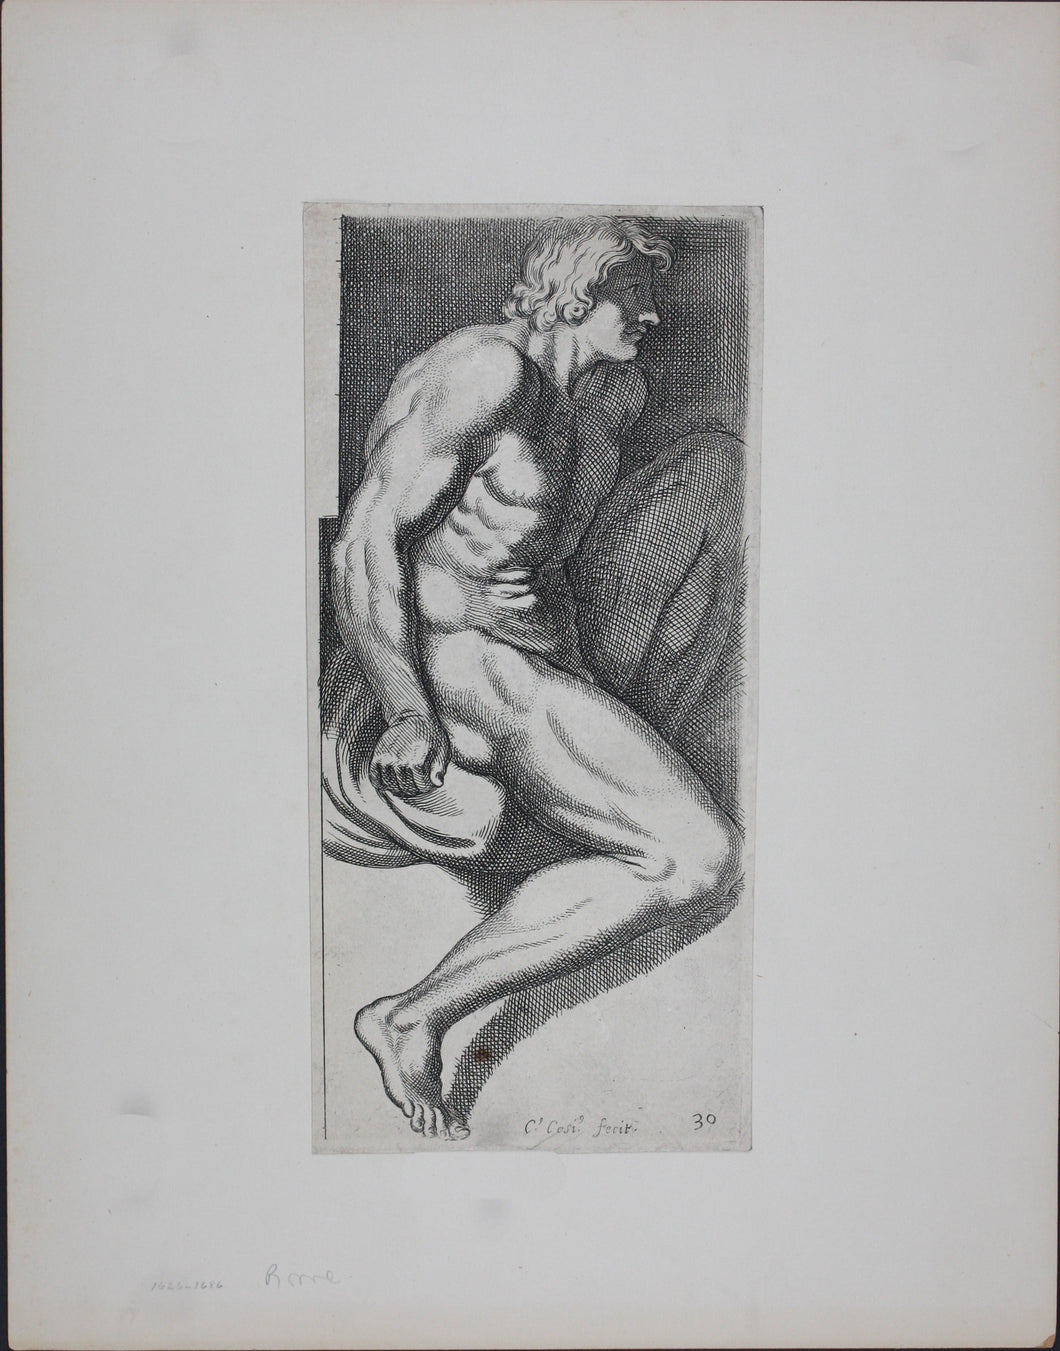 Annibale Carracci, after. An Ignudo. Etching by Carlo Cesi. 1657.